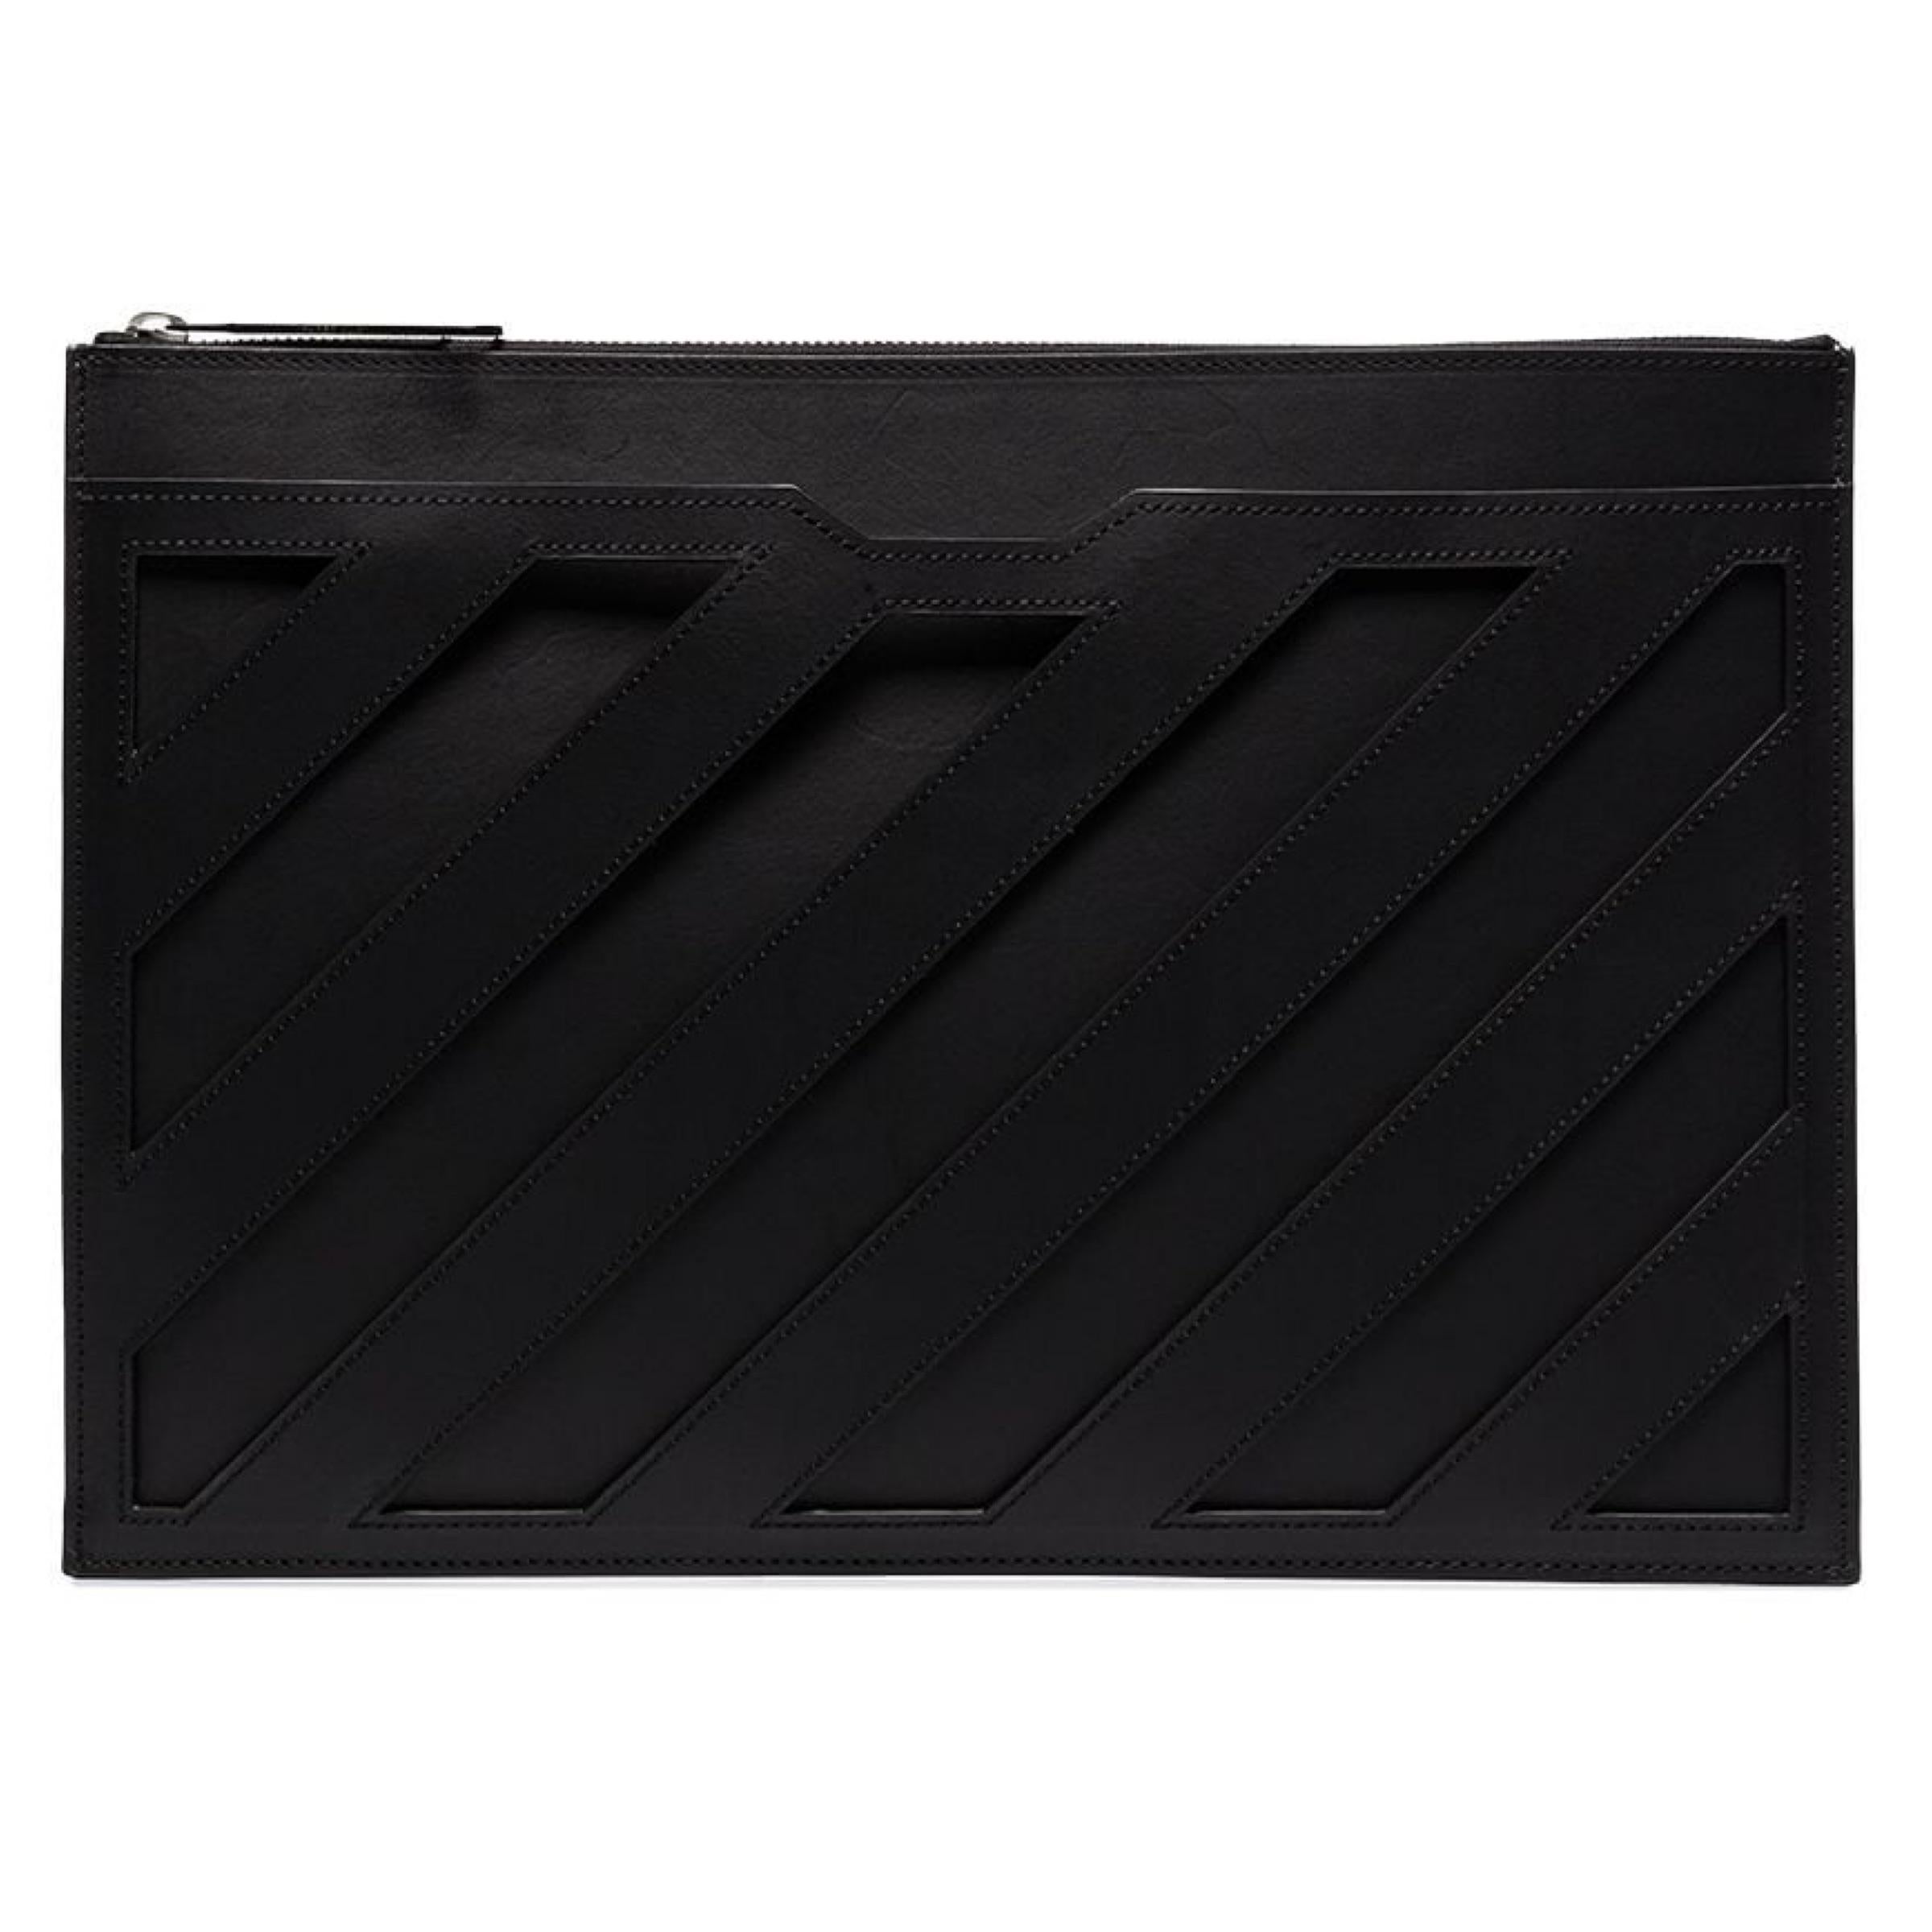 New Off-White Virgil Abloh Diagonal Stripes Leather Clutch Bag

Authenticity Guaranteed

DETAILS
Brand: Off-White Virgil Abloh
Gender: Unisex
Category: Clutch
Condition: Brand new
Color: Black
Material: Leather
Diagonal stripes pattern
Top zip